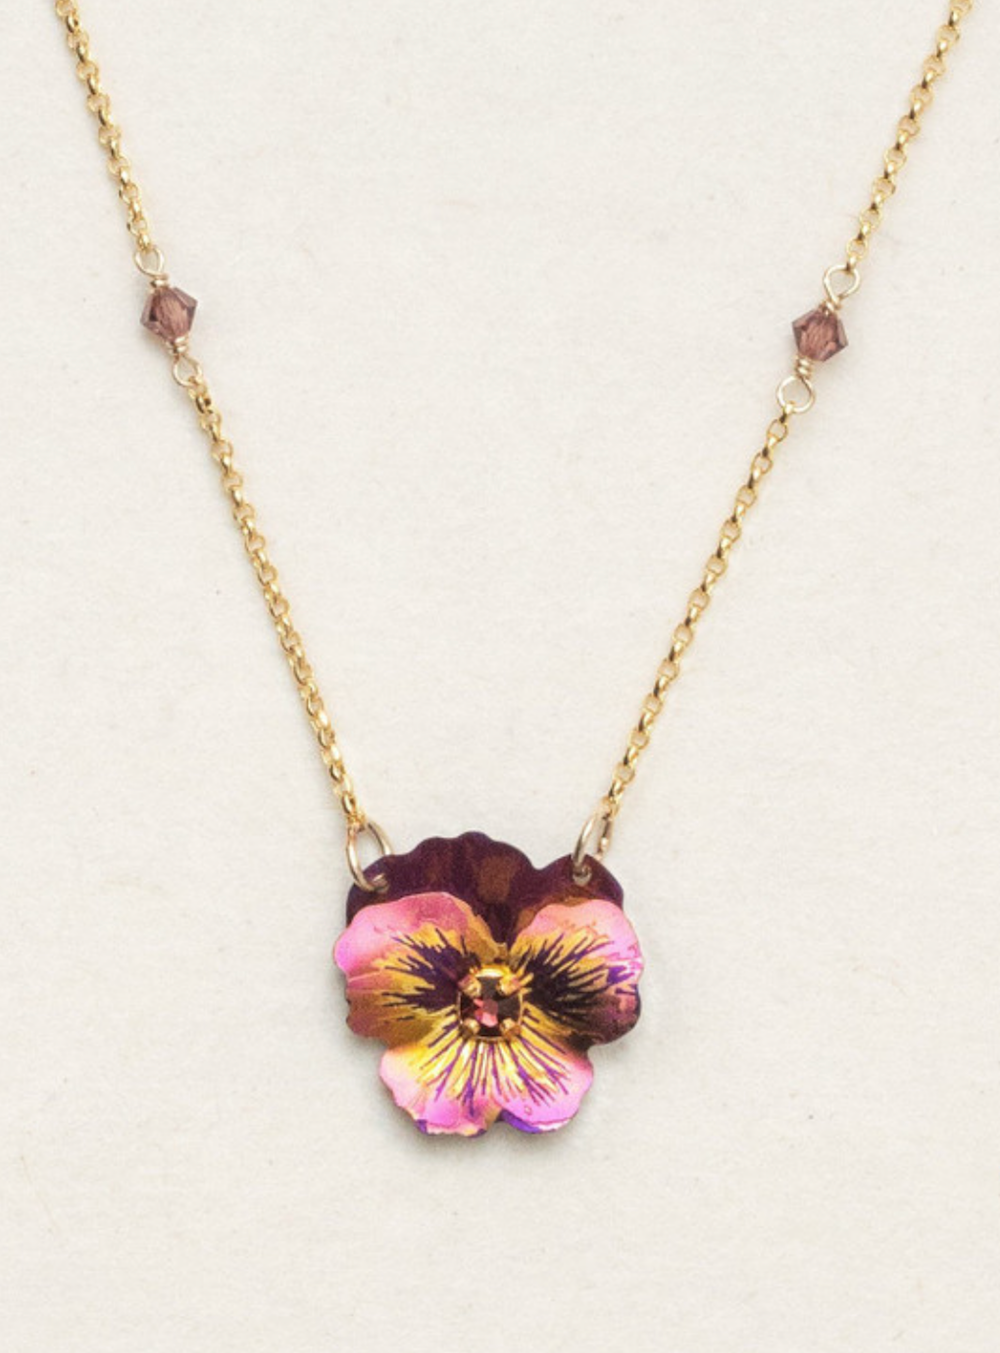 Garden Pansy Pendant Necklace in Vintage Burgundy - Heart of the Home PA